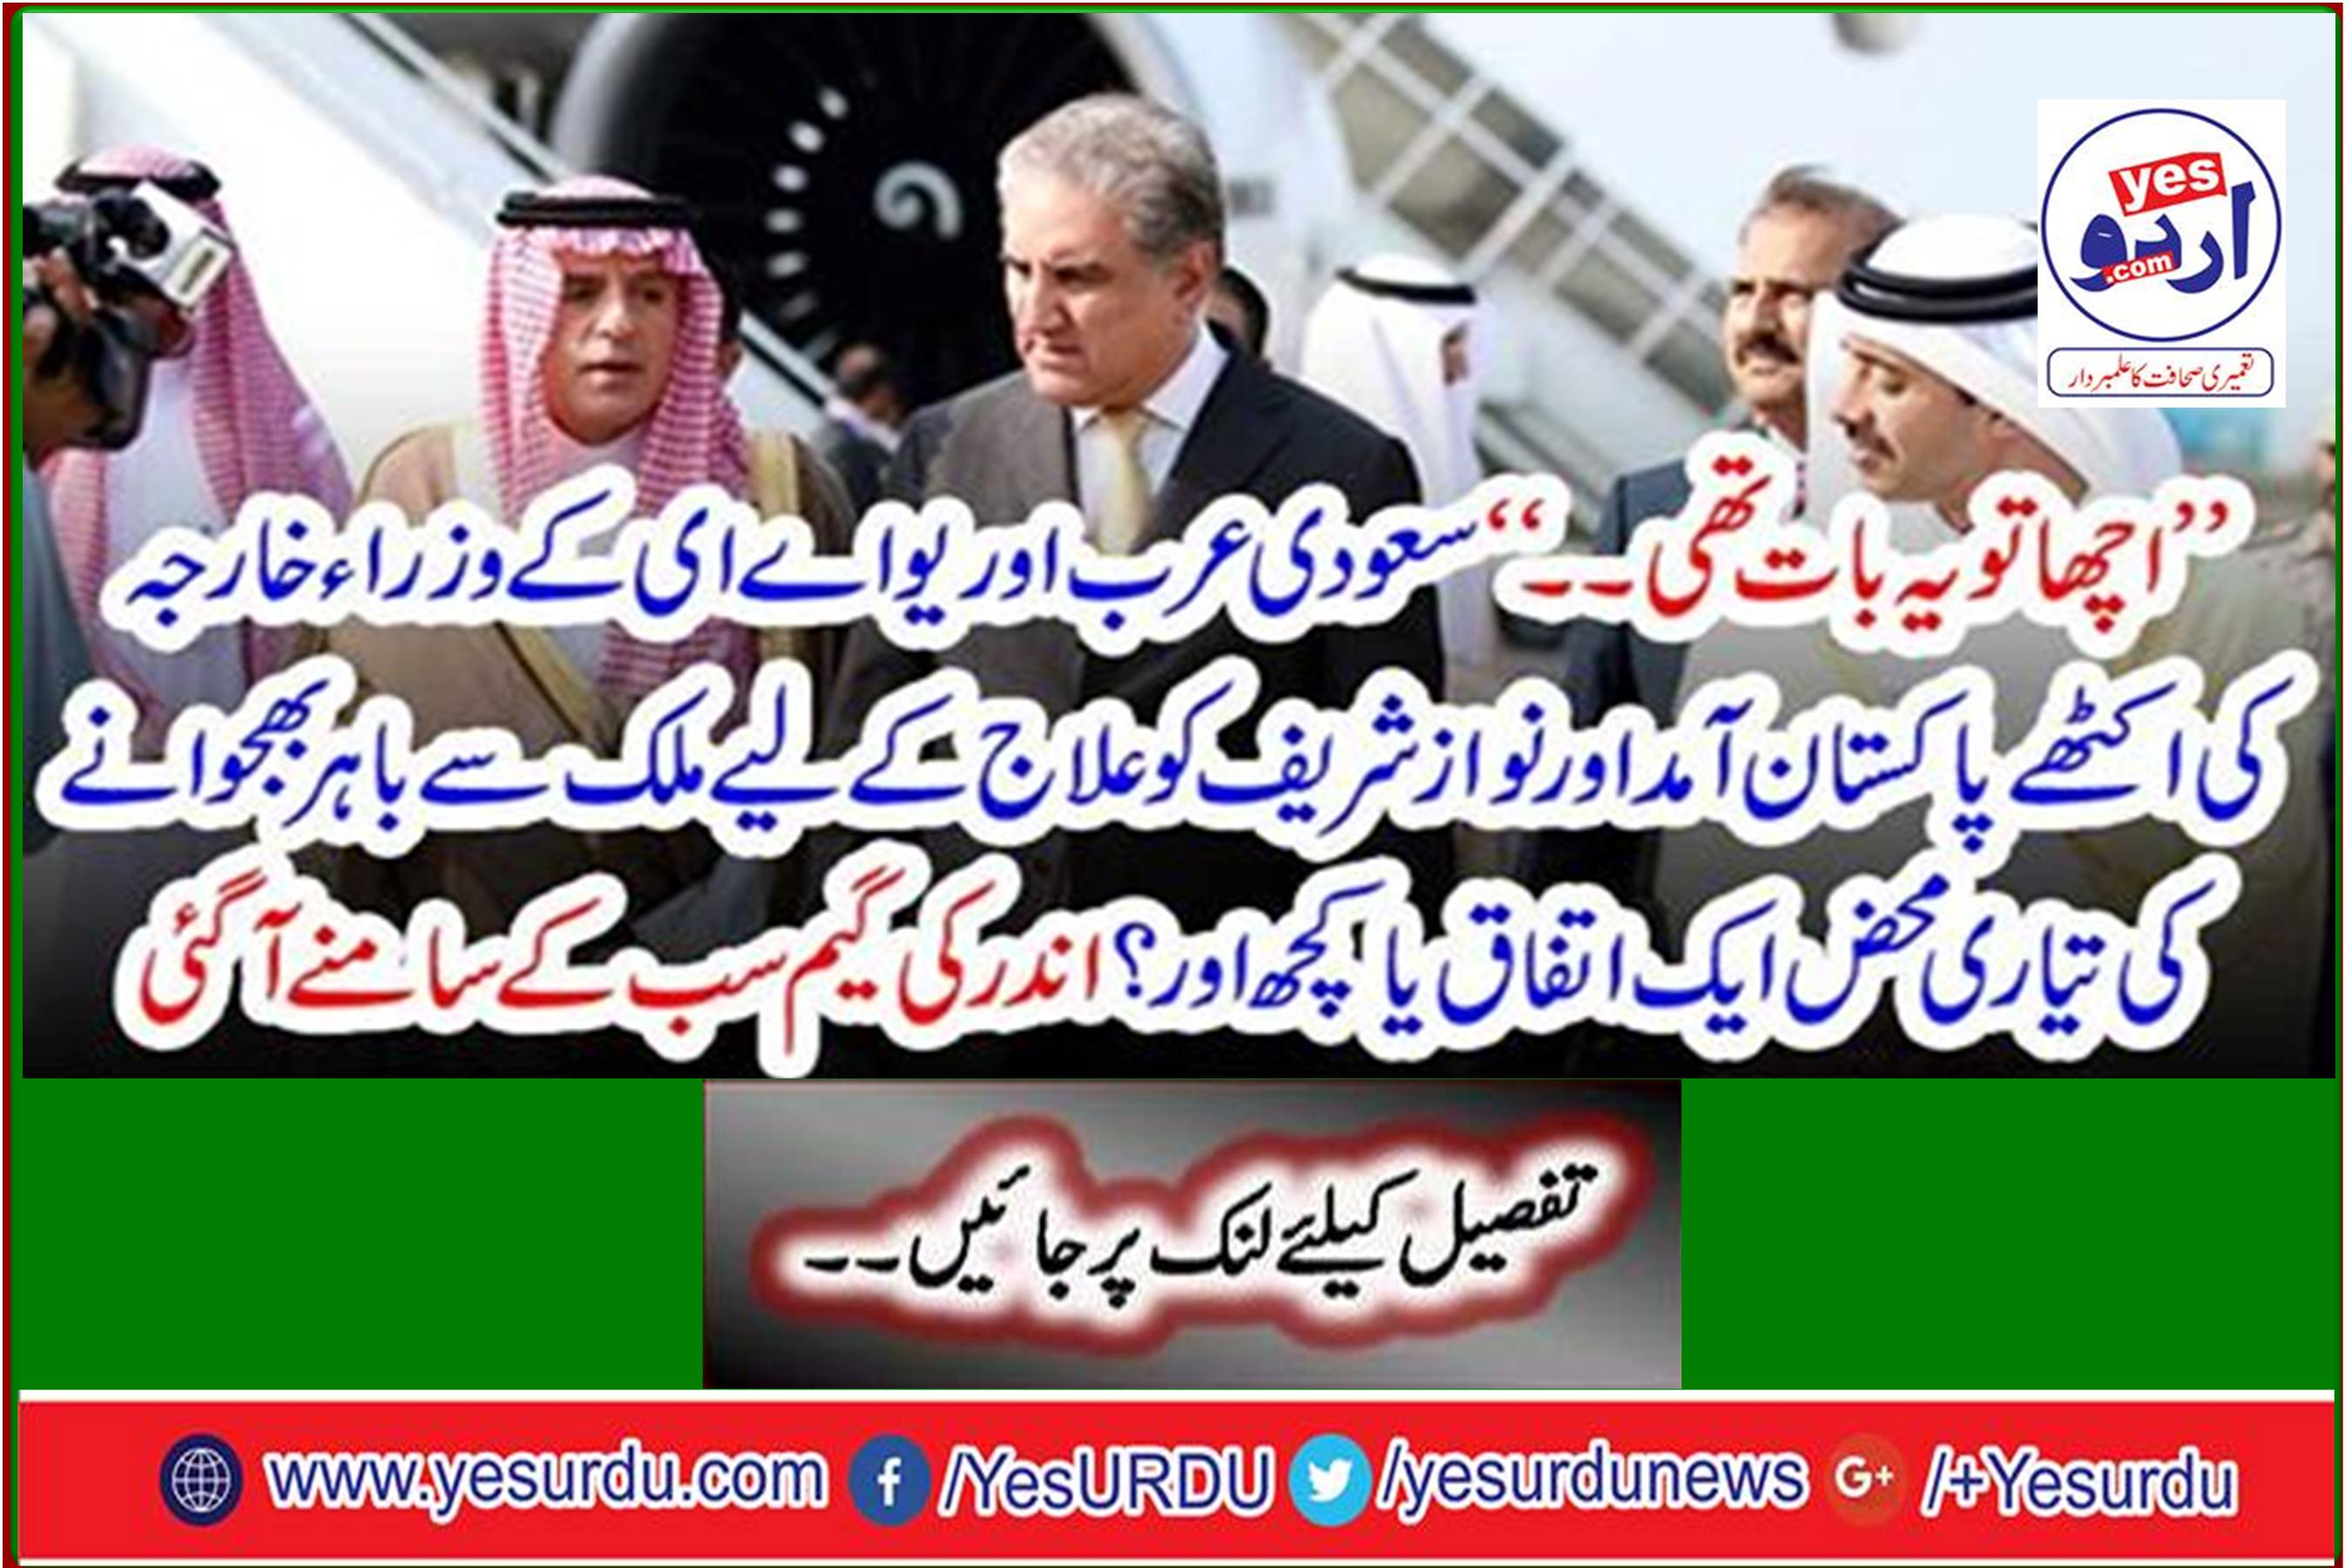 Is it a coincidence or something that the foreign ministers of Saudi Arabia and UAE are coming together to Pakistan and preparing to send Nawaz Sharif out of the country for treatment? The game inside came out in front of everyone